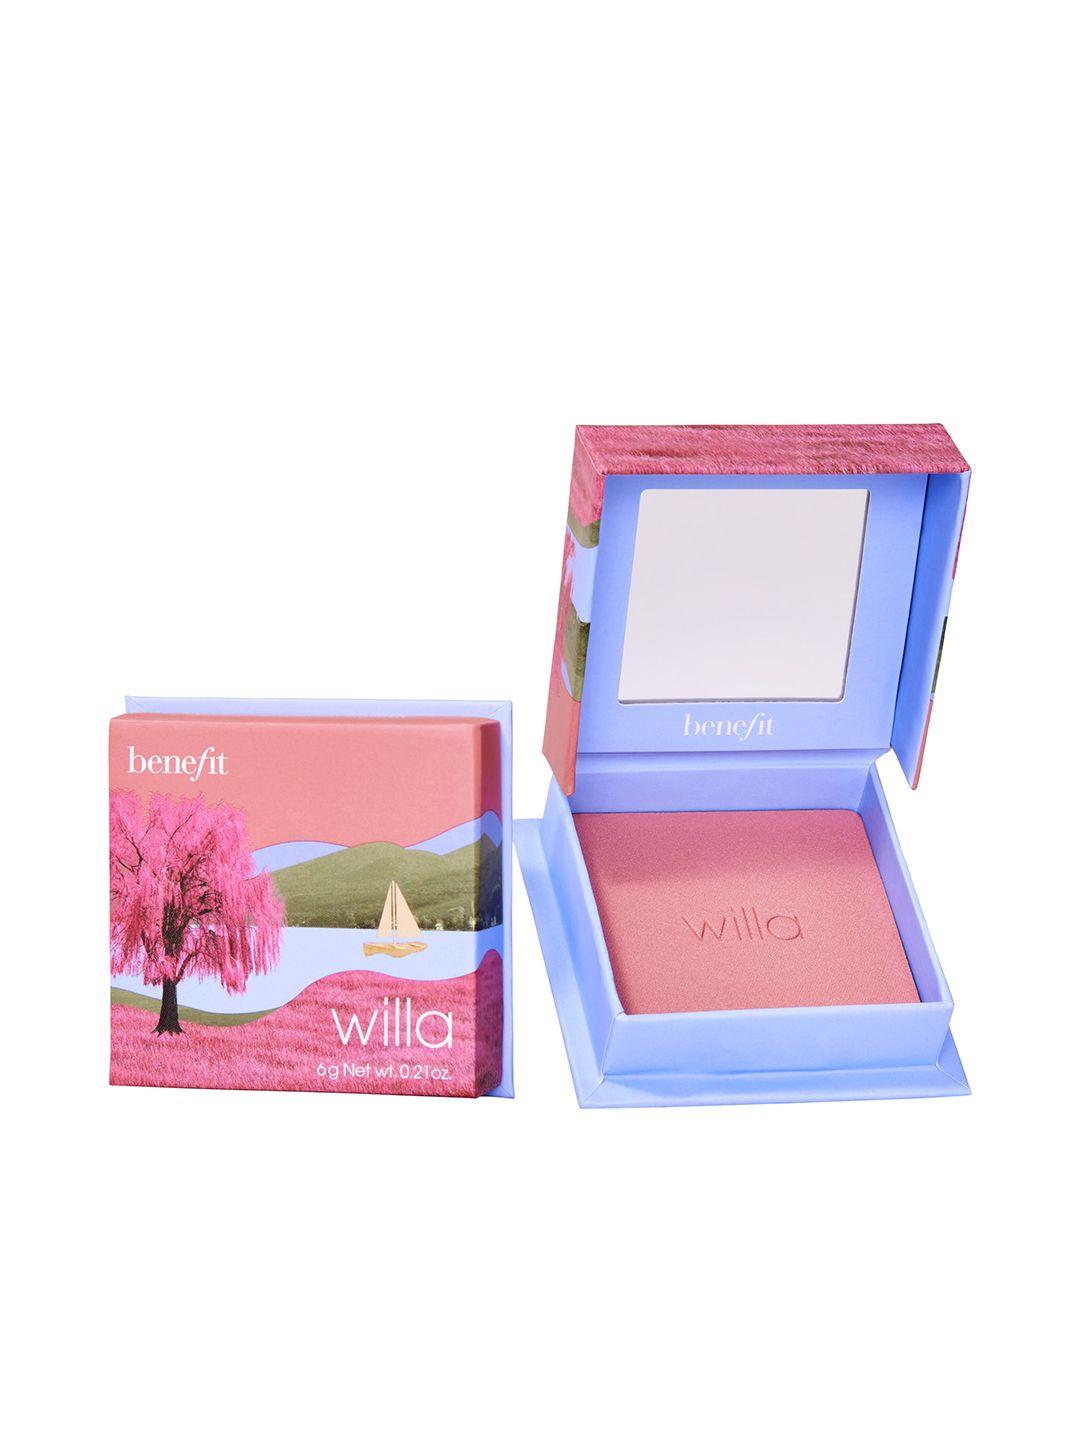 benefit cosmetics smudge-proof soft shimmer finish neutral-rose blush 6 g - willa